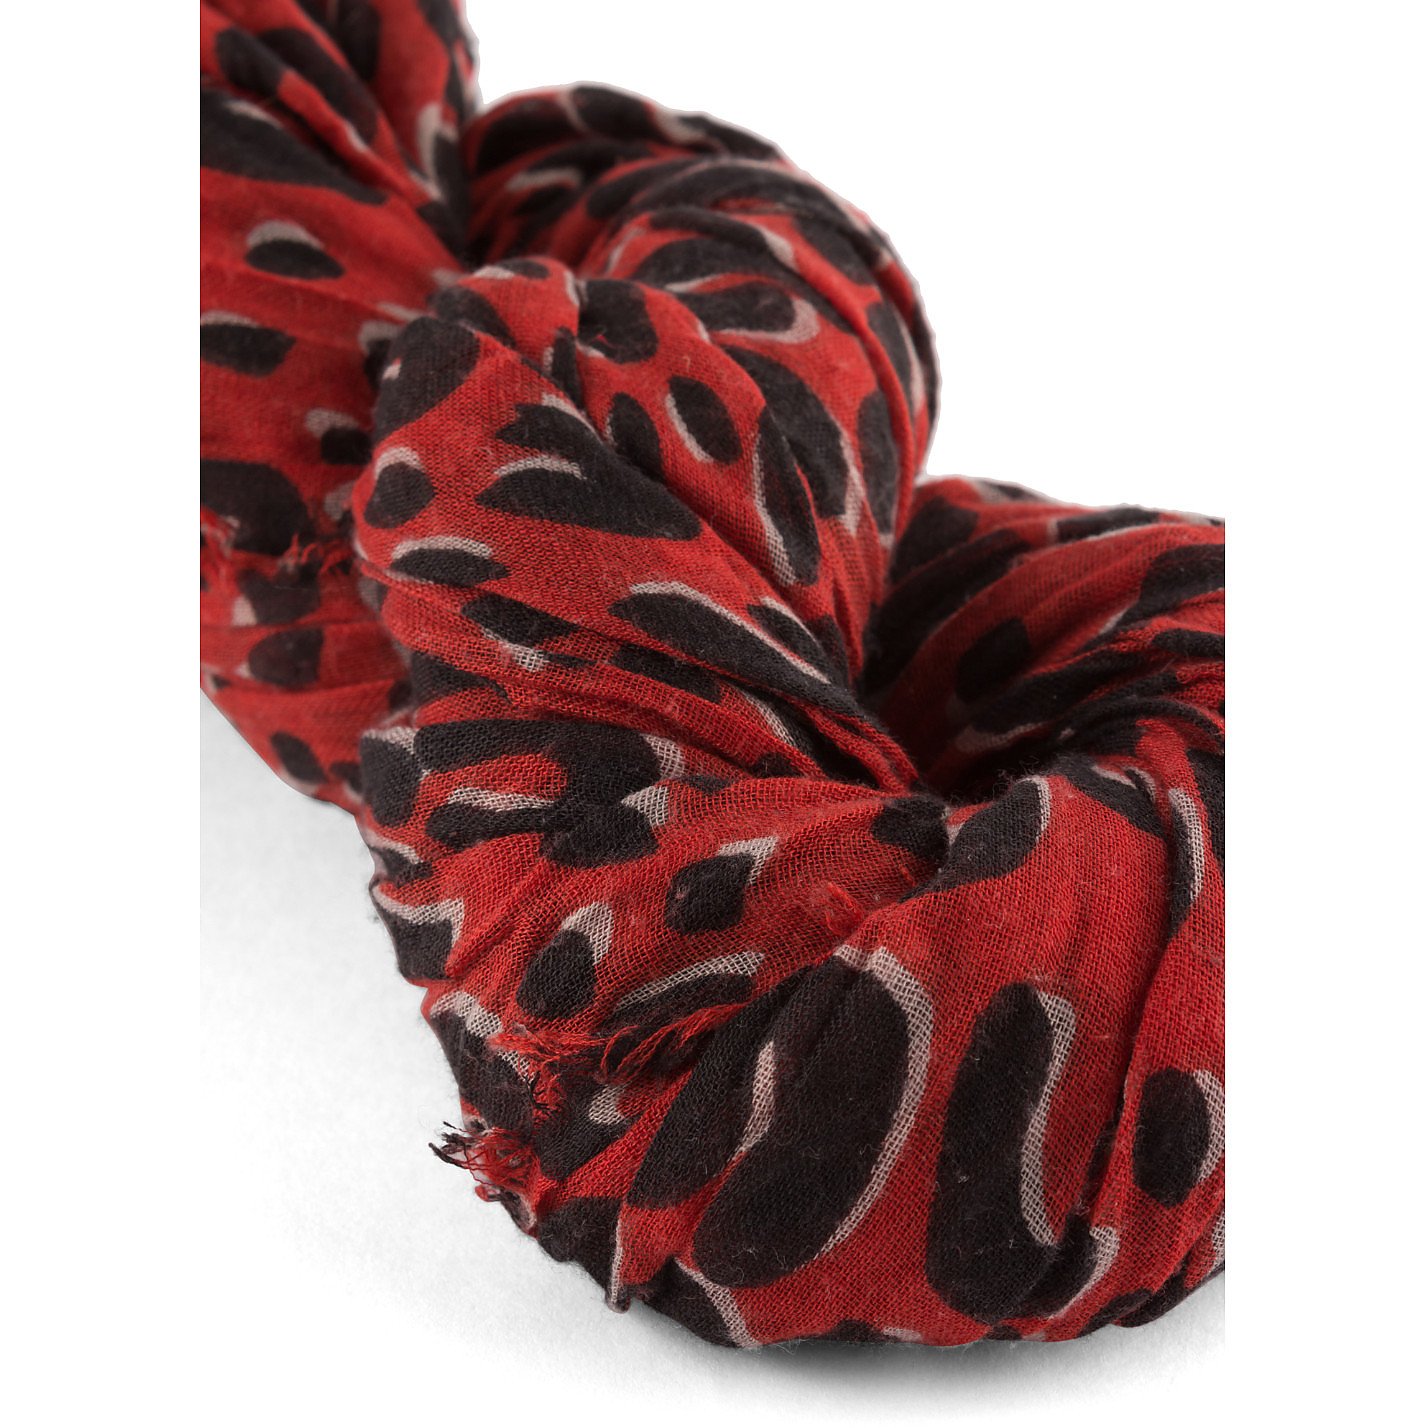 Rent or Buy Louis Vuitton Large Red Animal Print Scarf from www.paulmartinsmith.com